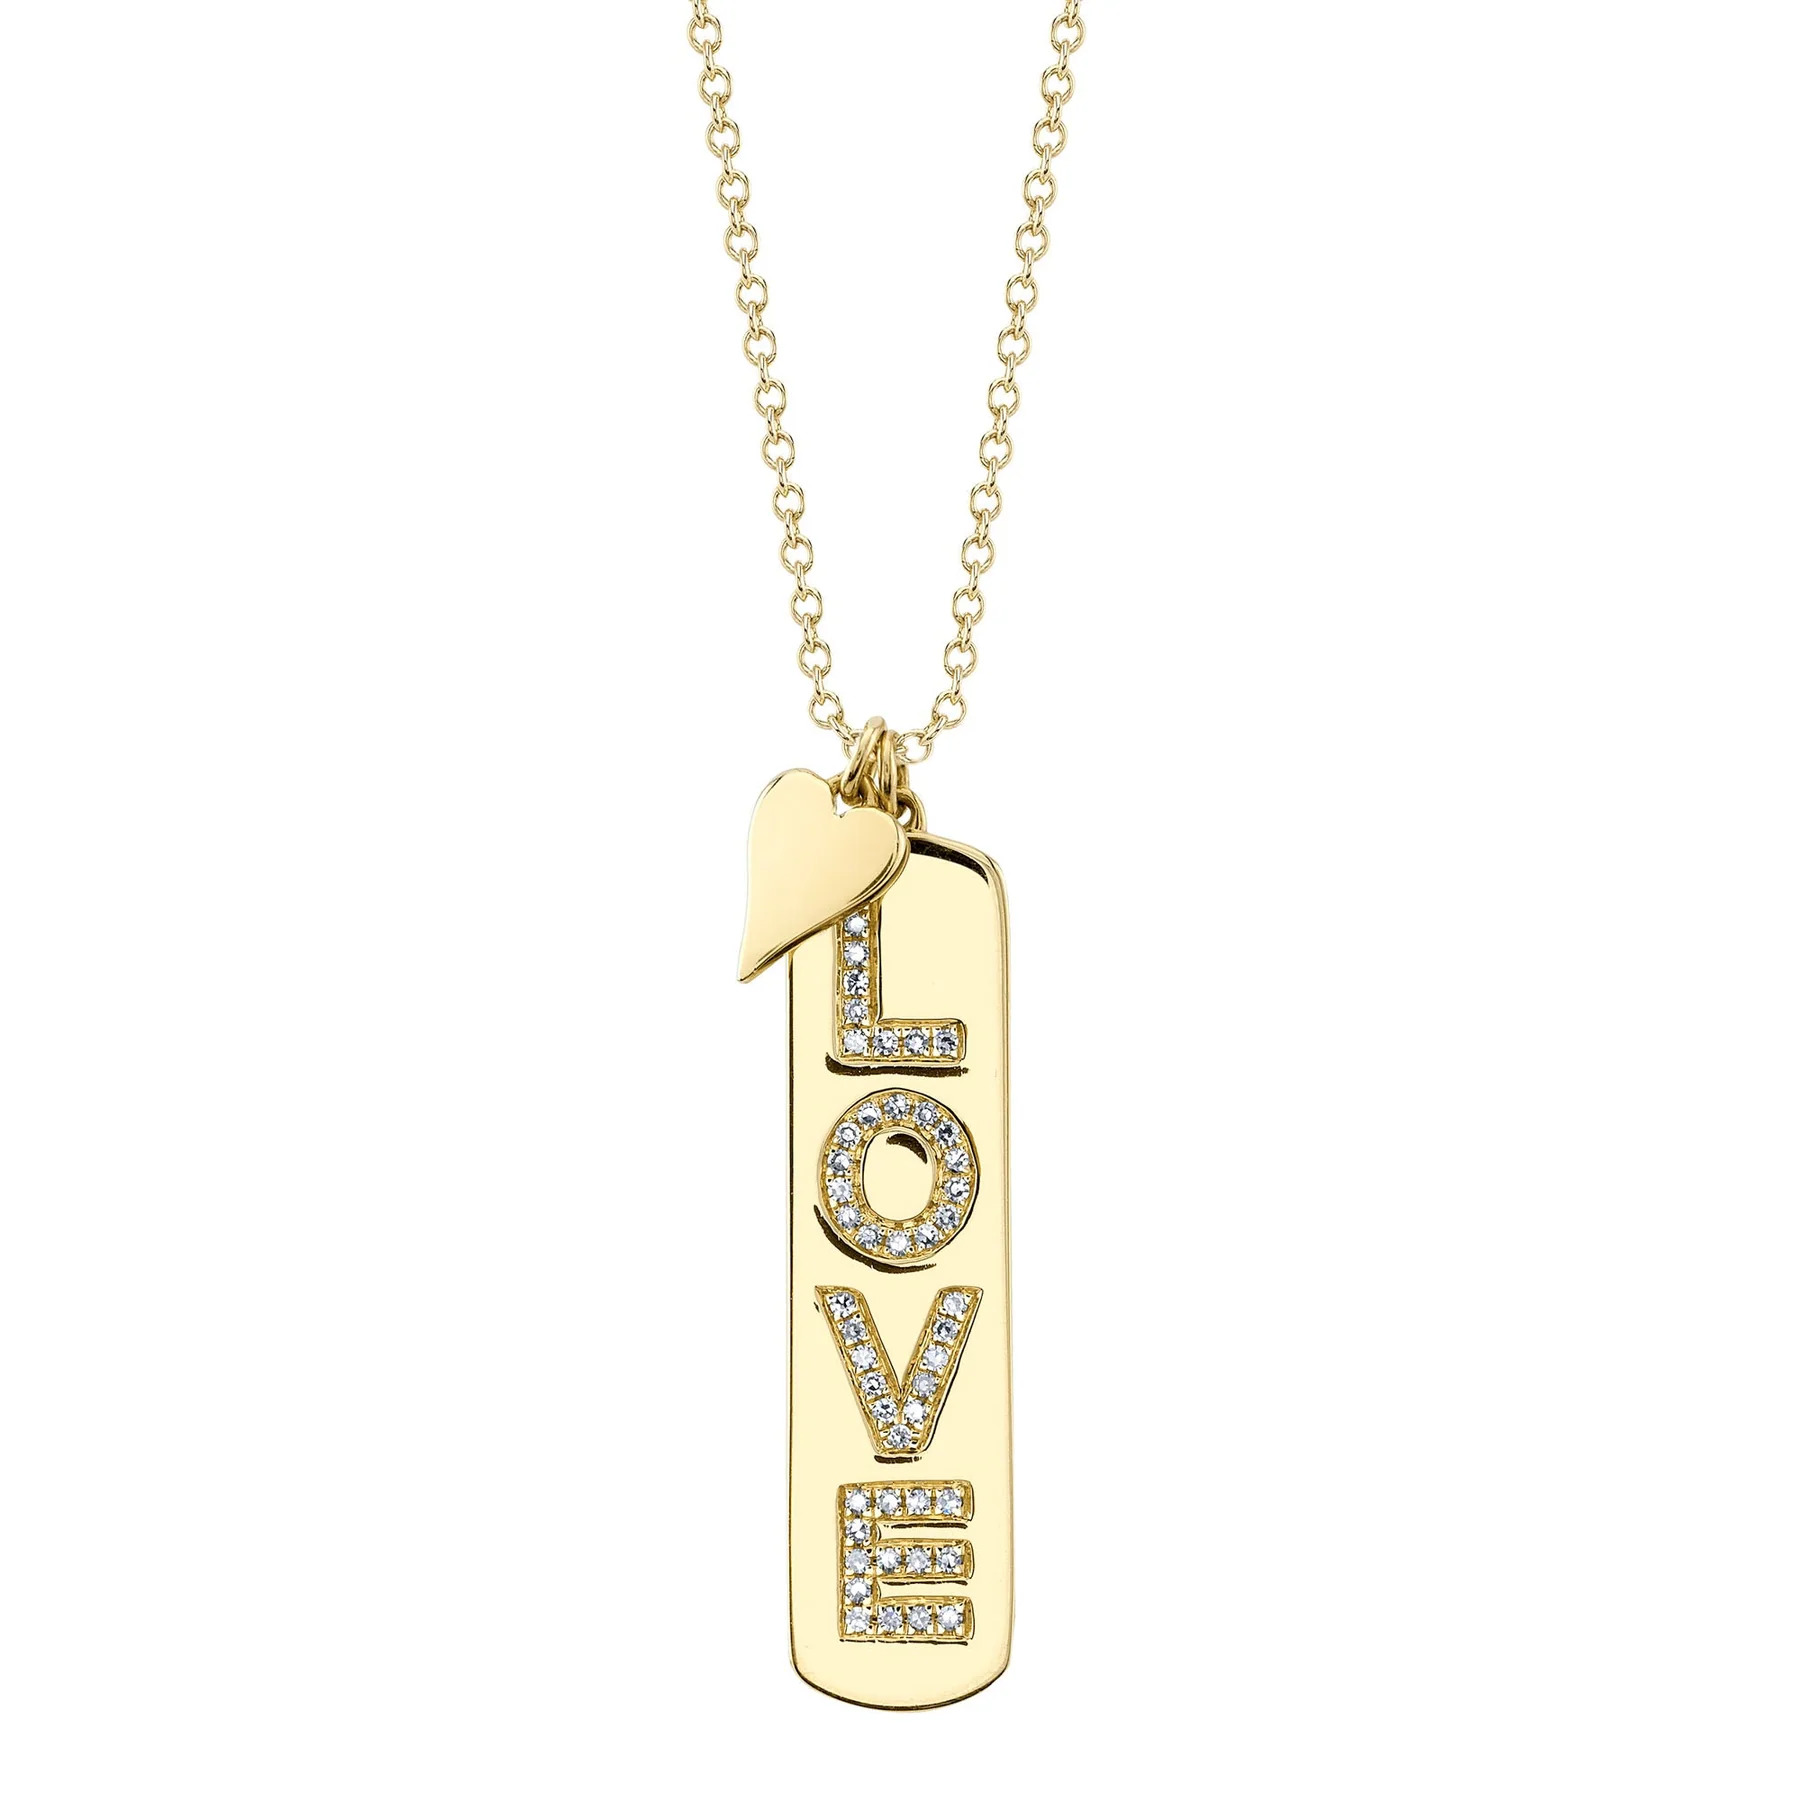 One yellow gold necklace with dual pendants. The first pendant has a small plated heart shape. The second pendant is rectangular in shape and features the letters L-O-V-E, with a diamond embellishment on each letter.